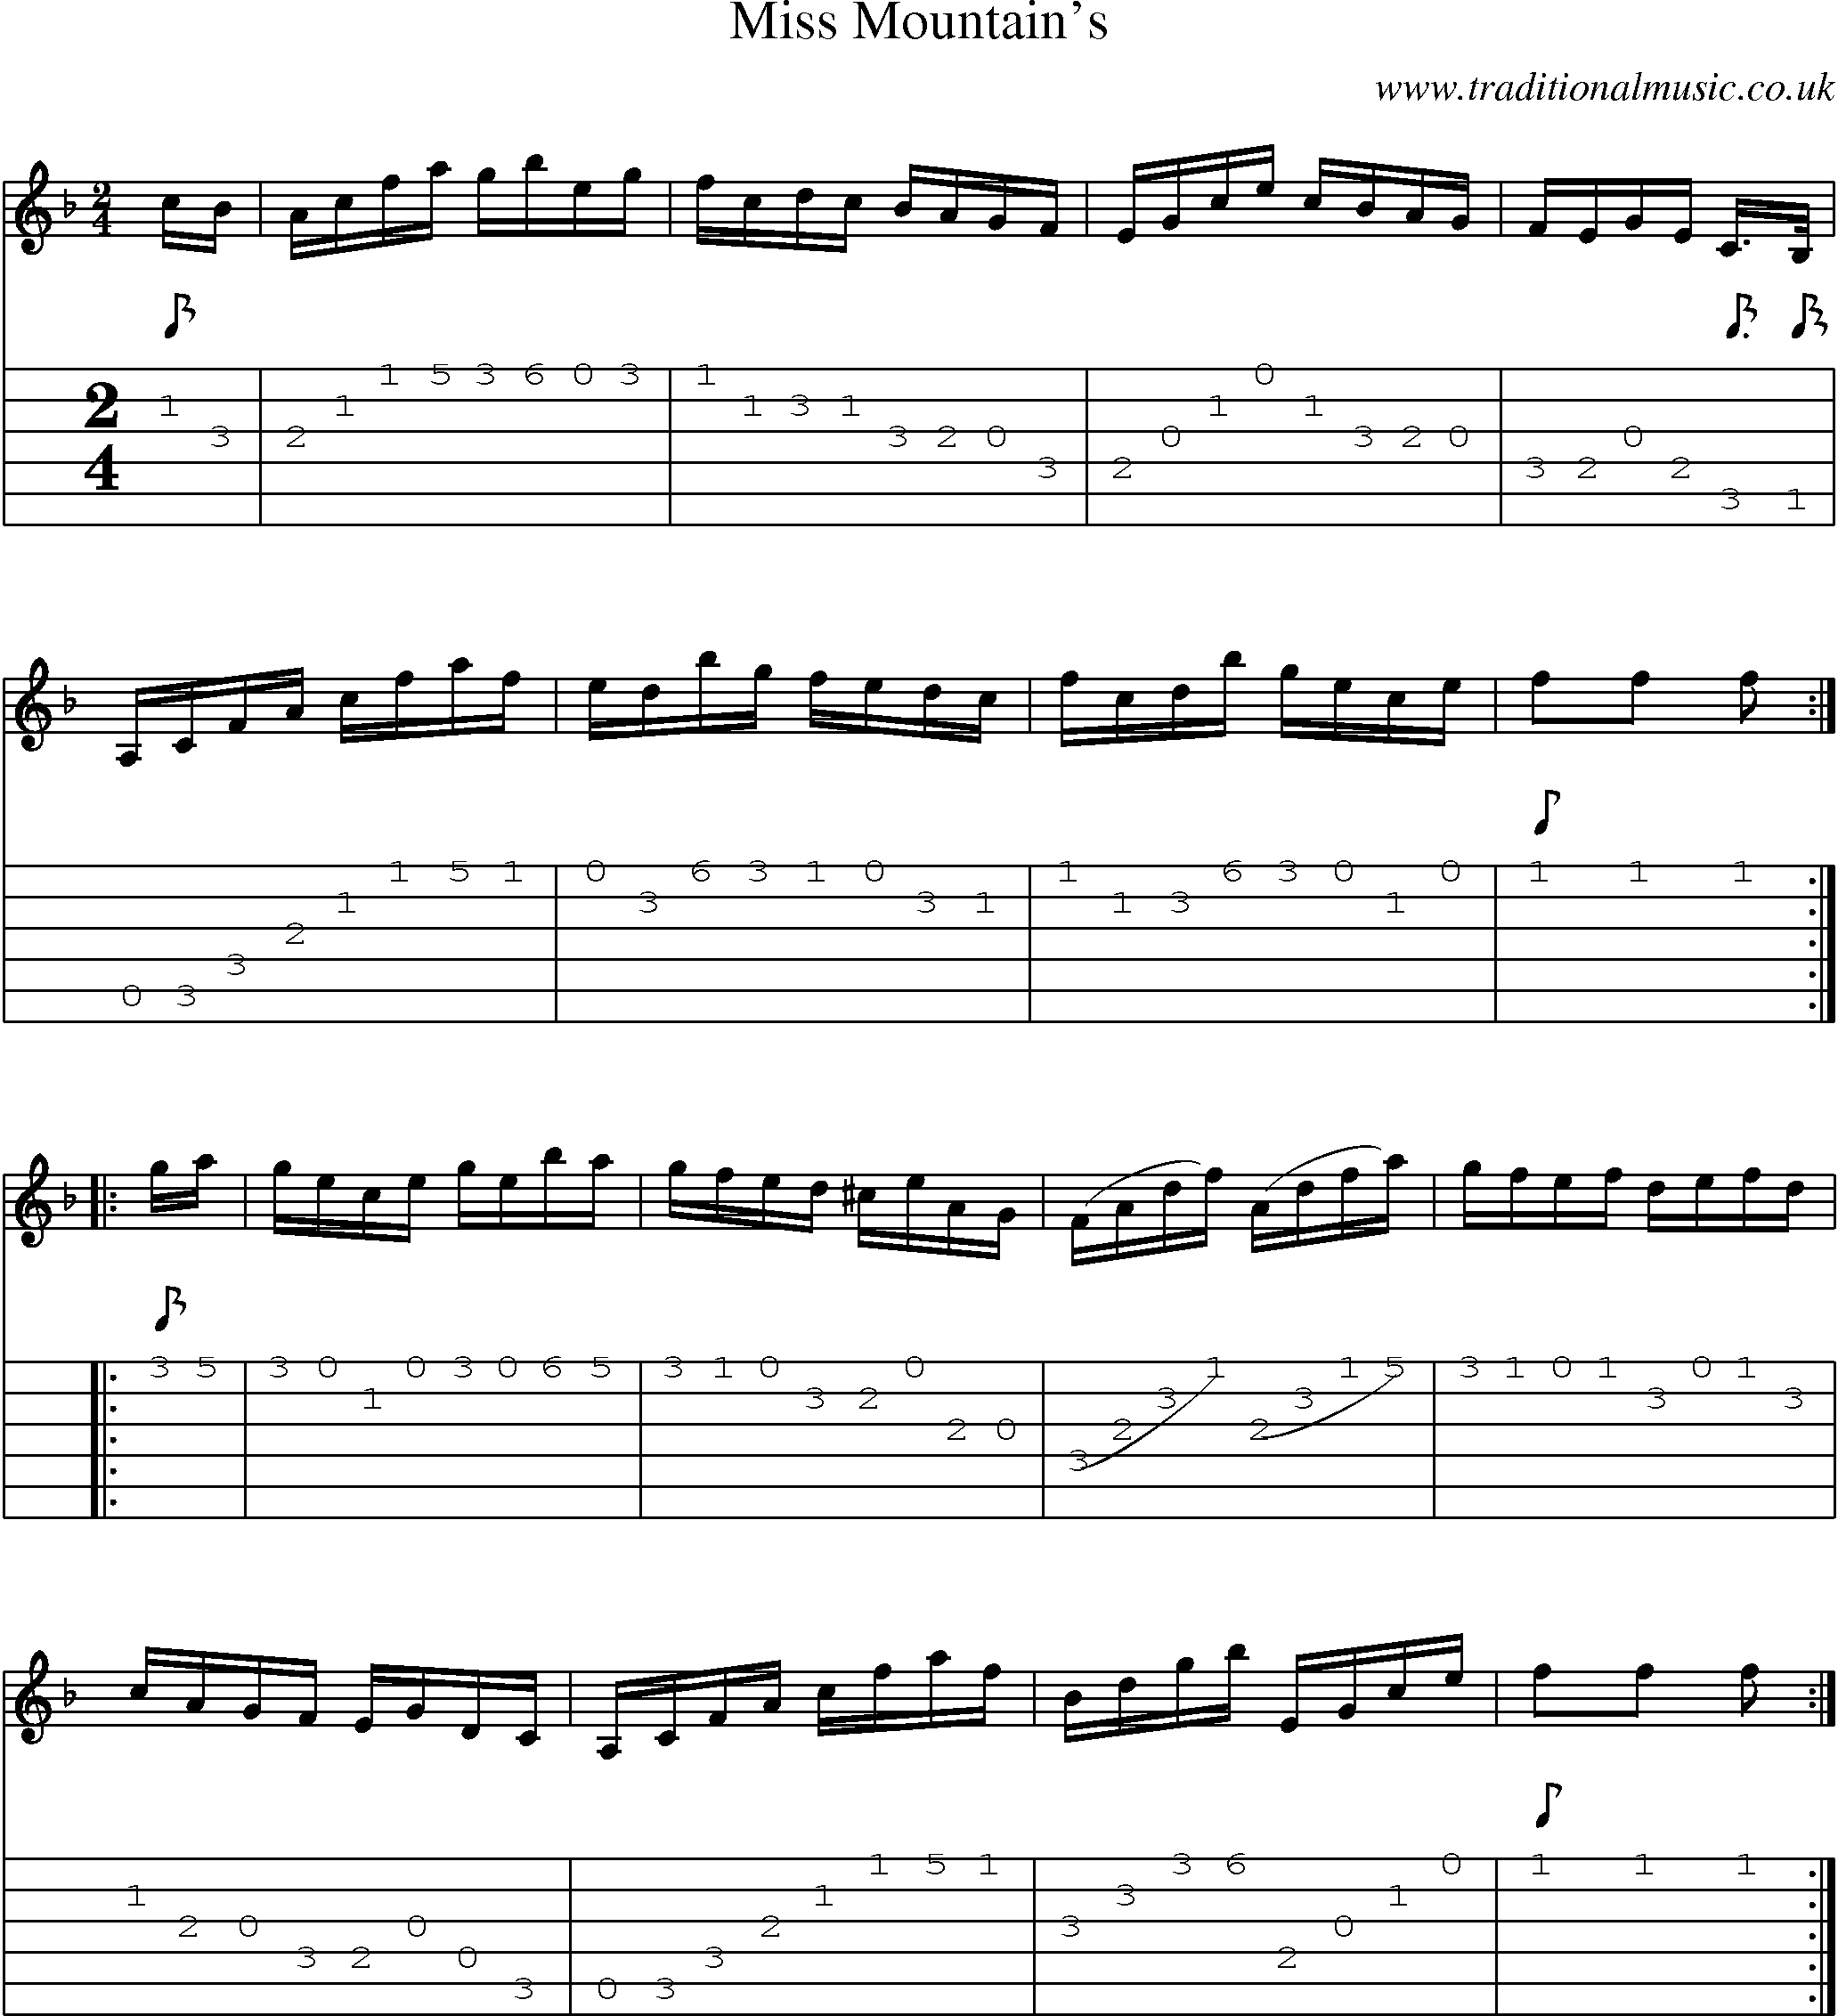 Music Score and Guitar Tabs for Miss Mountains